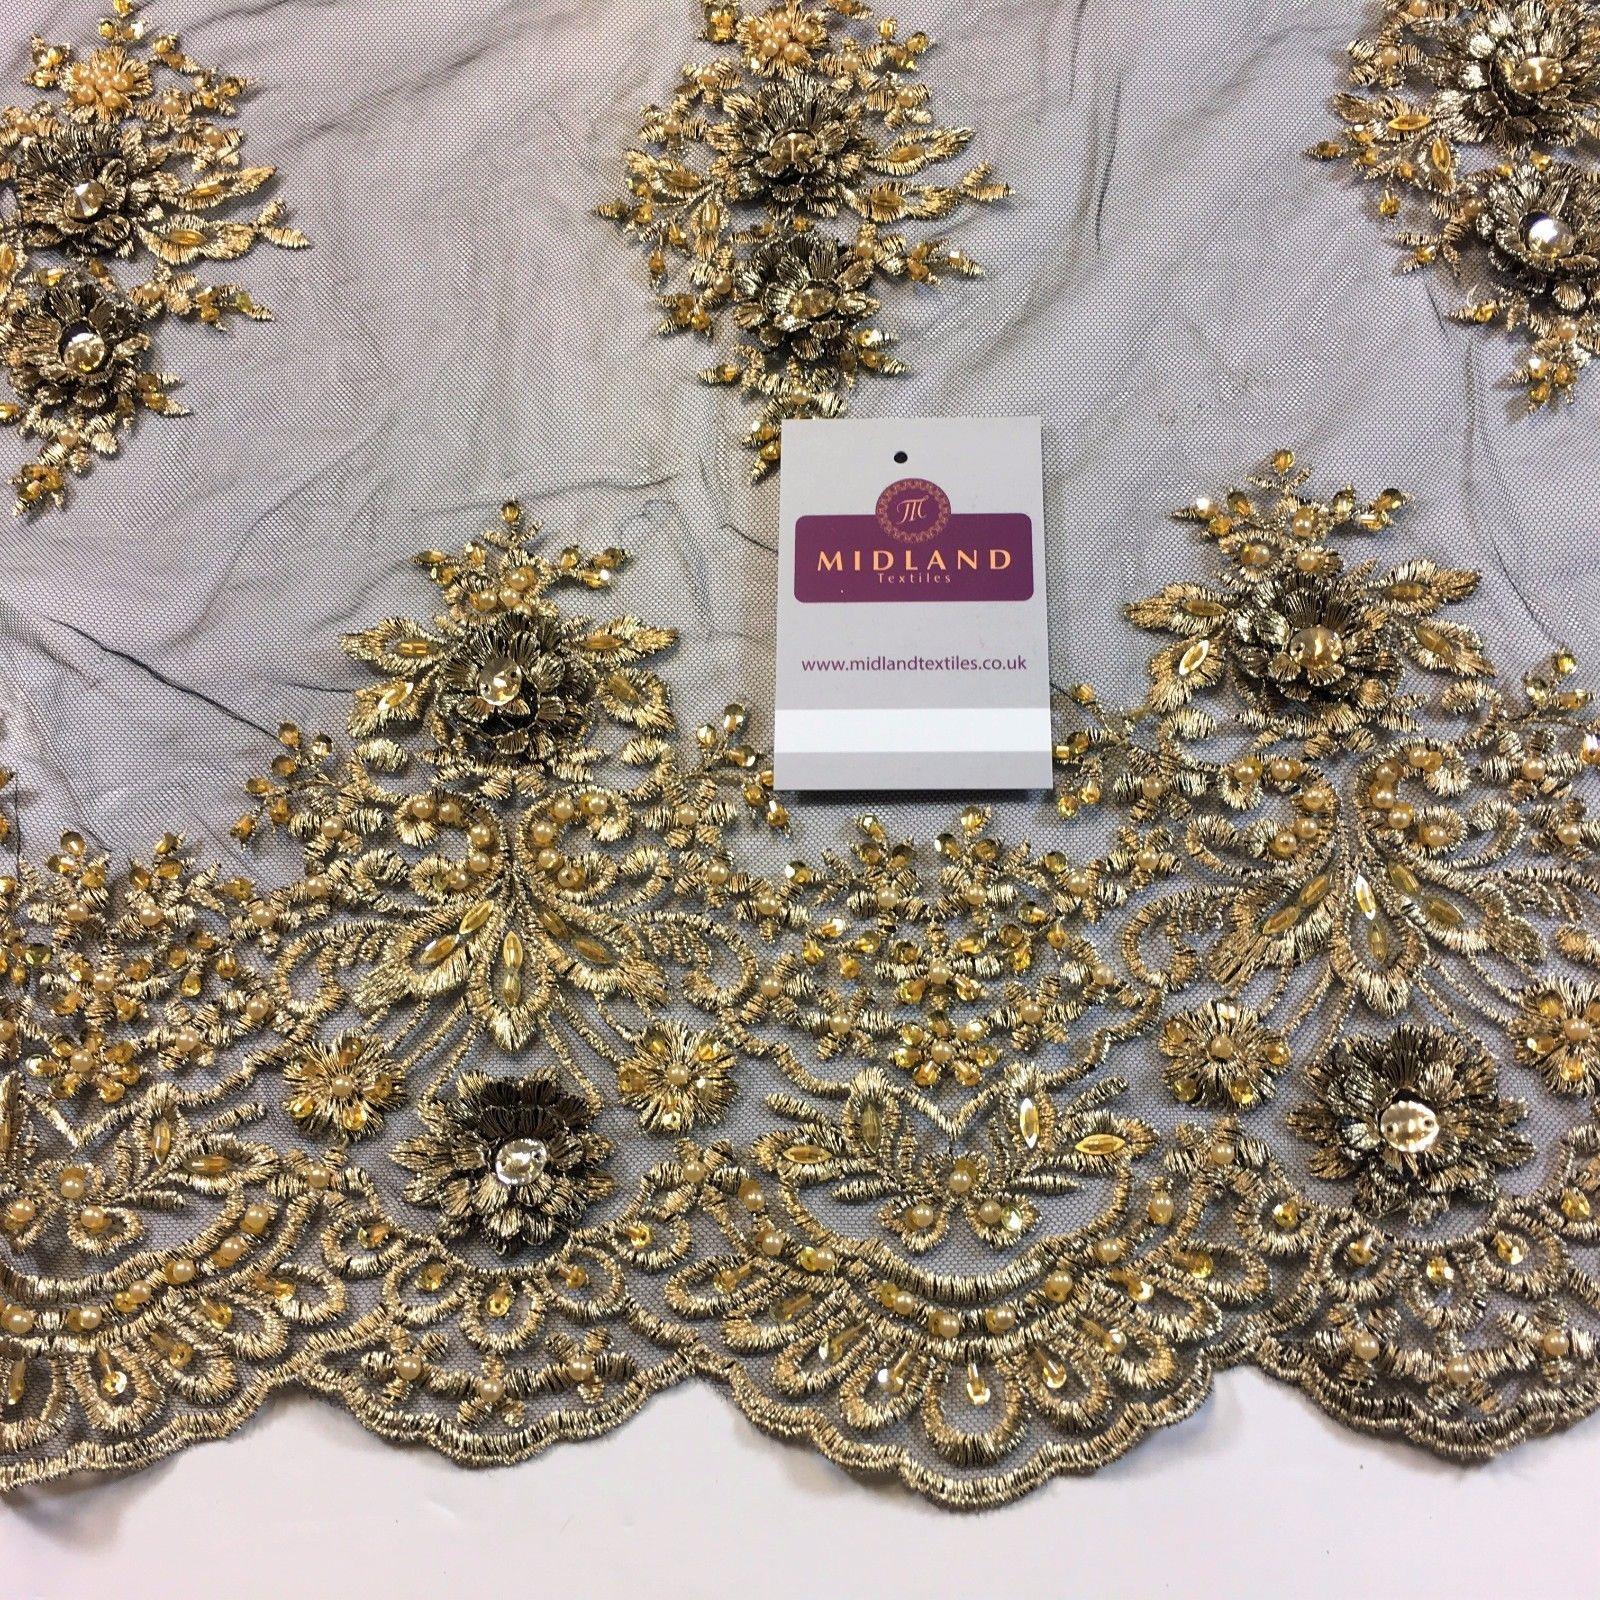 Floral Embellished Scalloped Edged Dress Net with faux pearls Fabric 58" M792 - Midland Textiles & Fabric